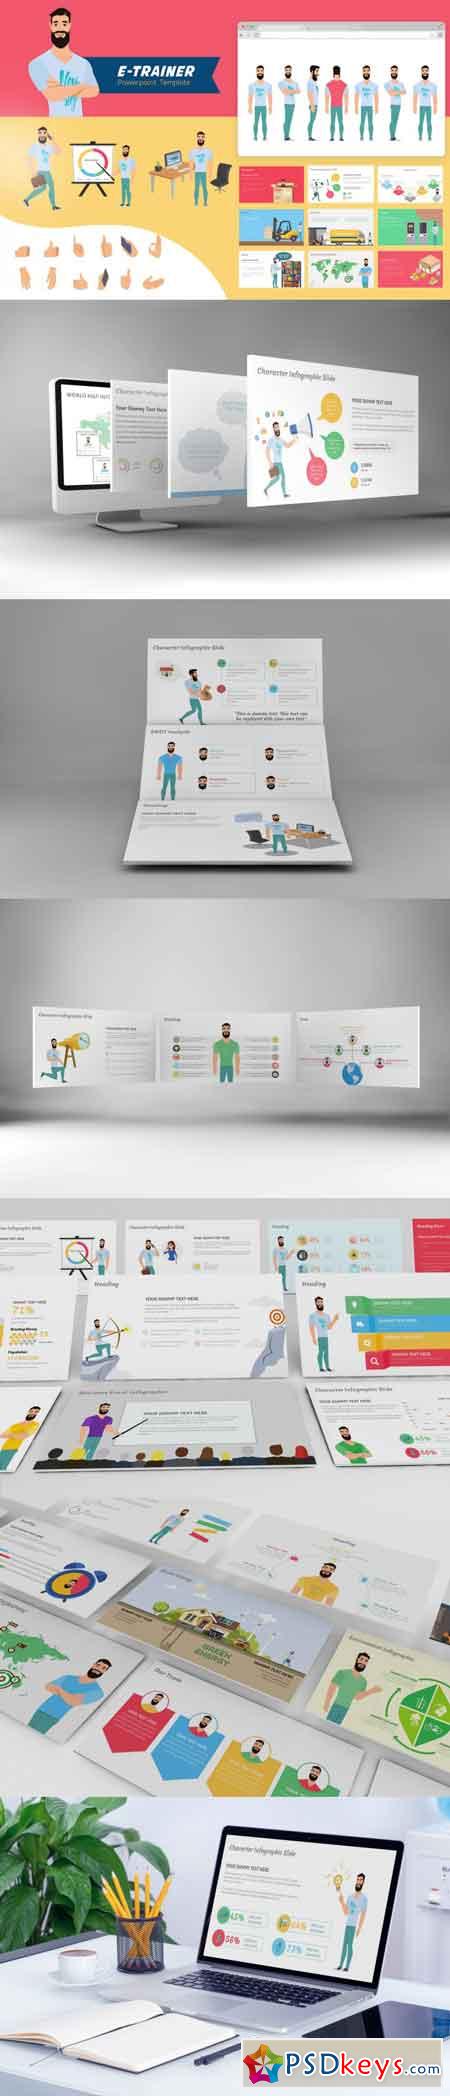 E-Trainer PowerPoint Template 1 3486728